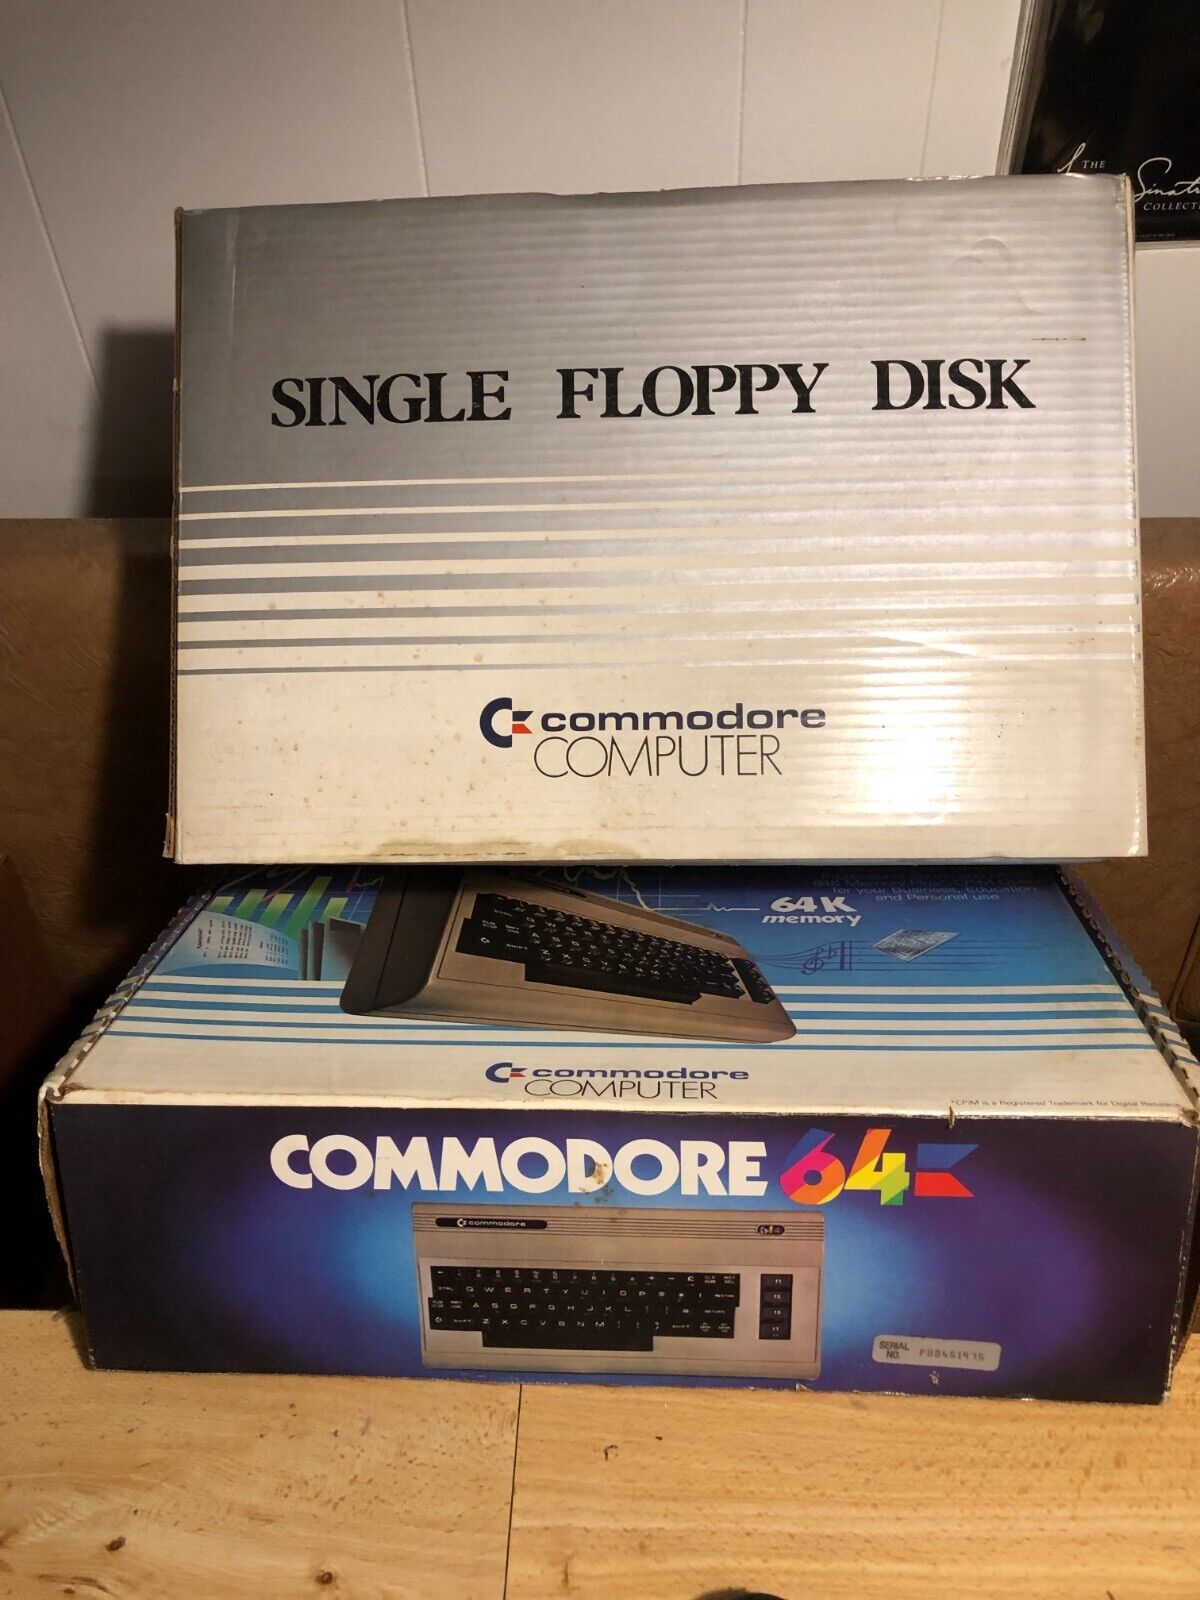 Commodore 64 and Commodore 1541 with accessories and original boxes